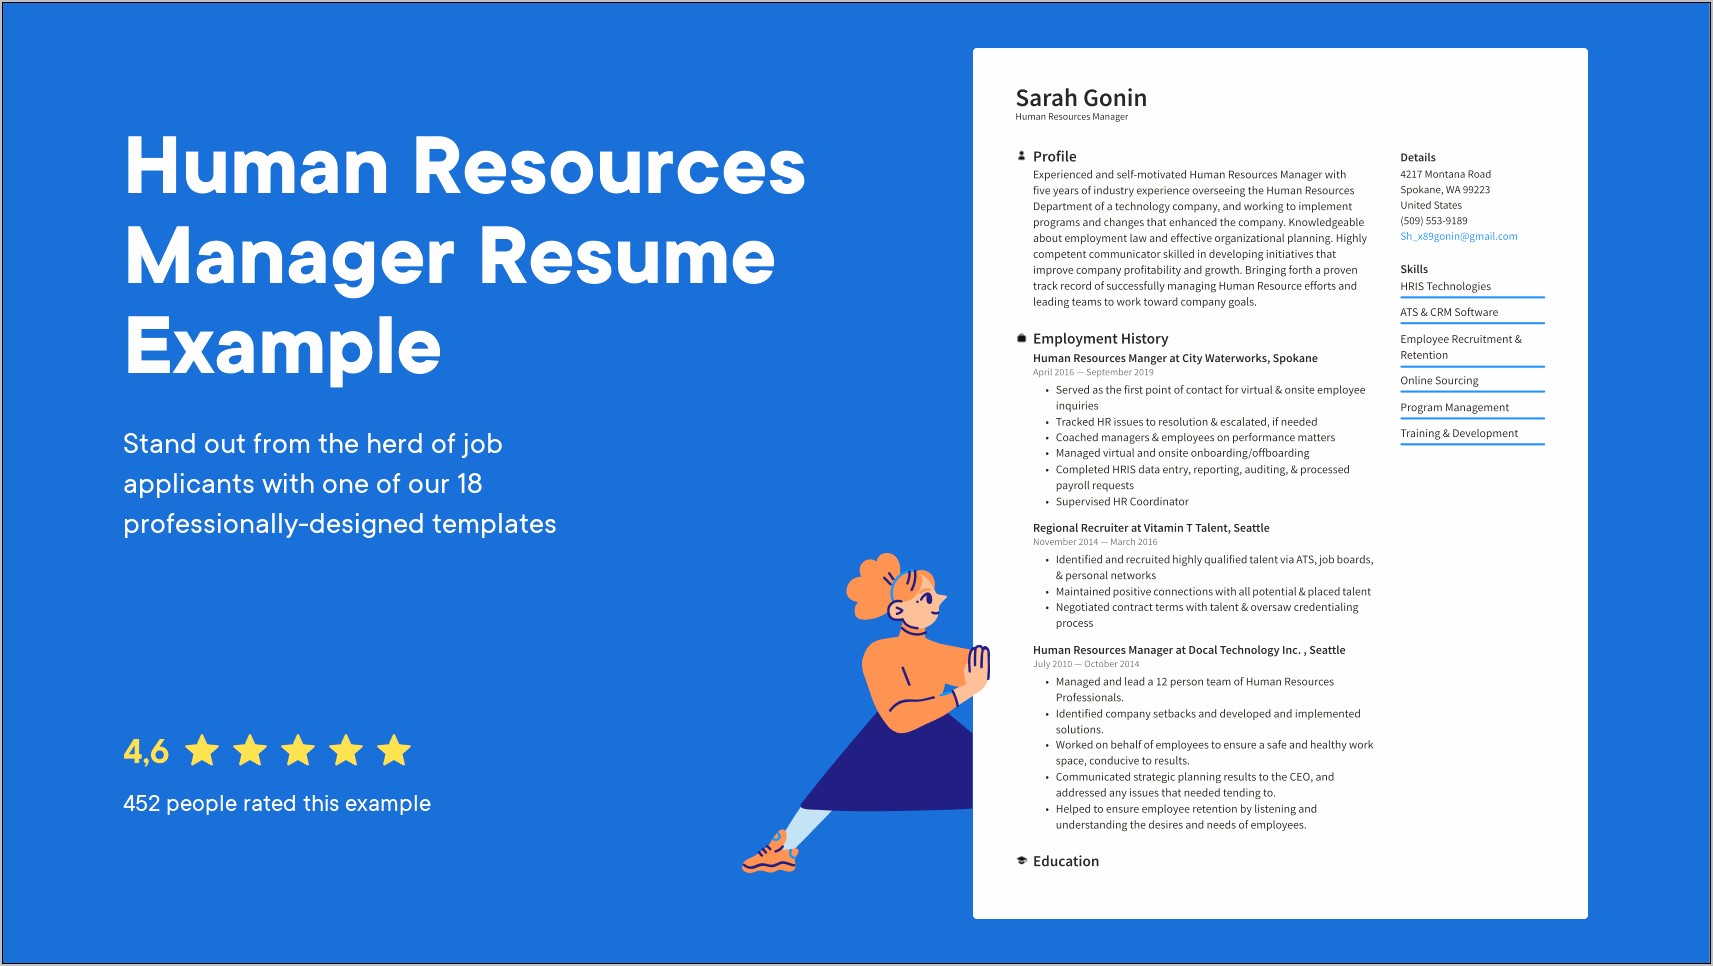 Sample Resume For Experienced Hr Manager